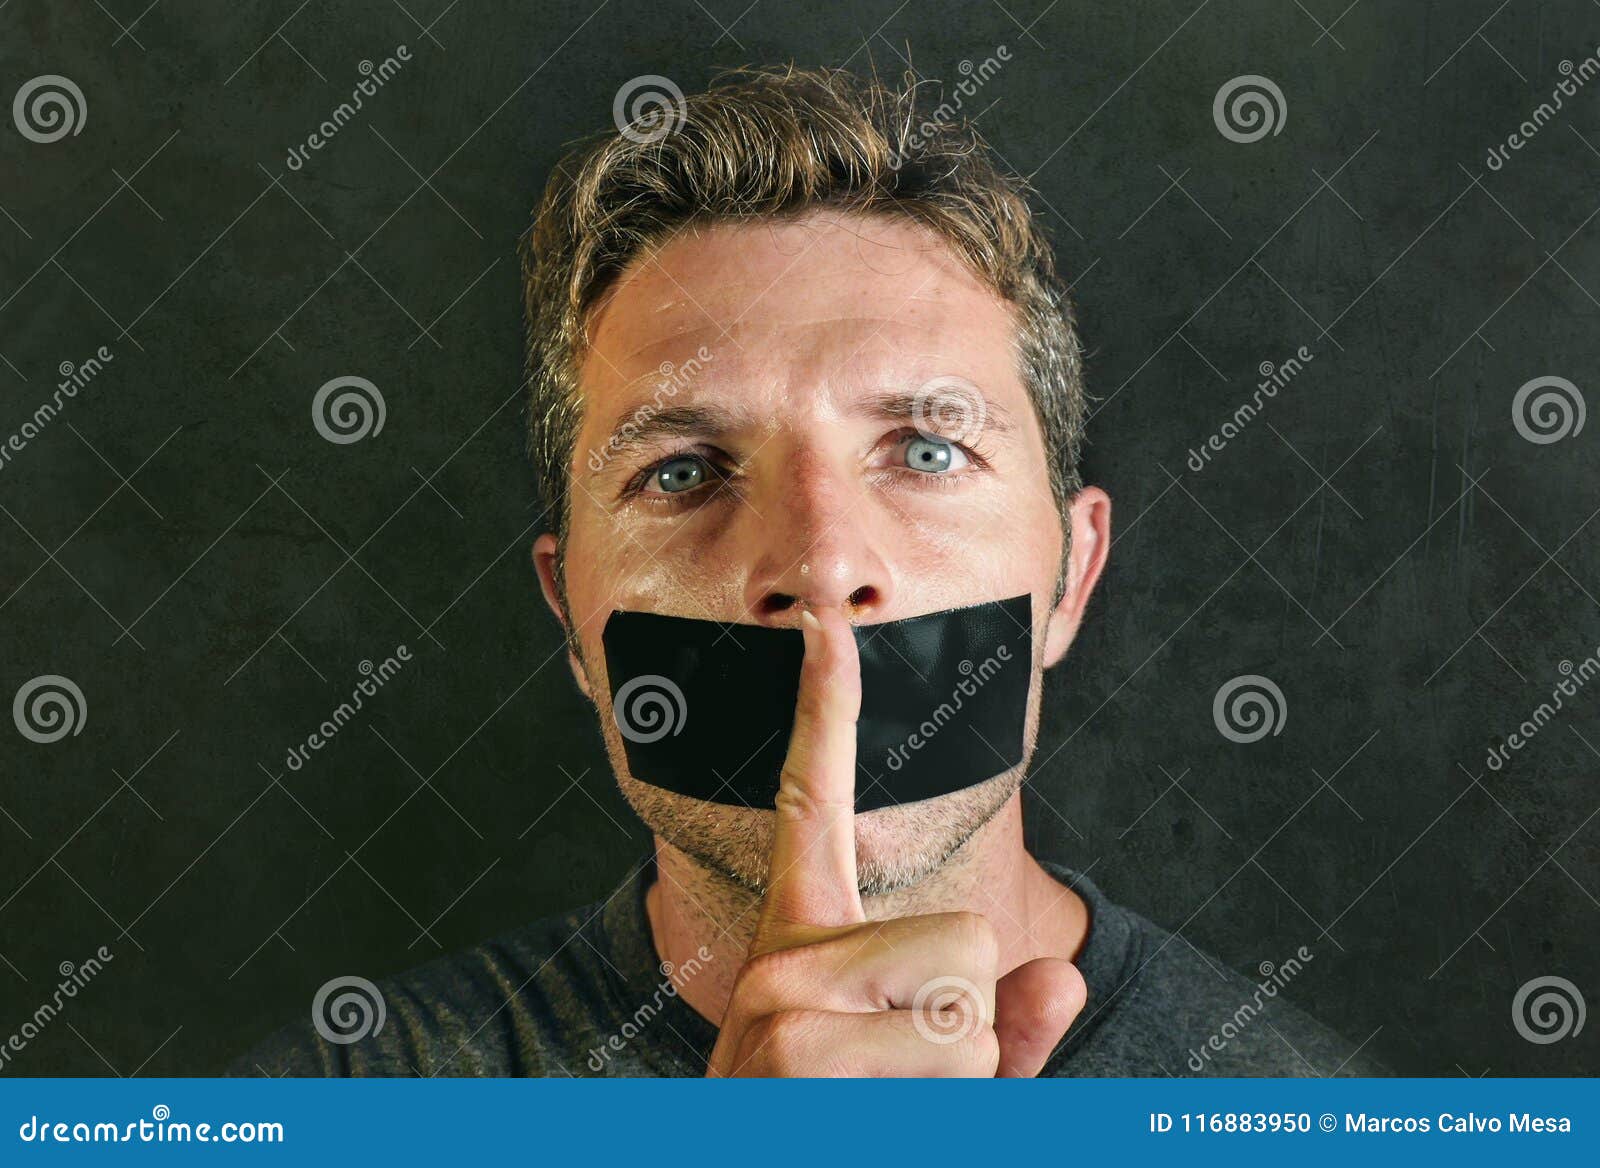 young man with mouth and lips sealed covered with adhesive tape in censorship coerced freedom of speech and forced silence and sec